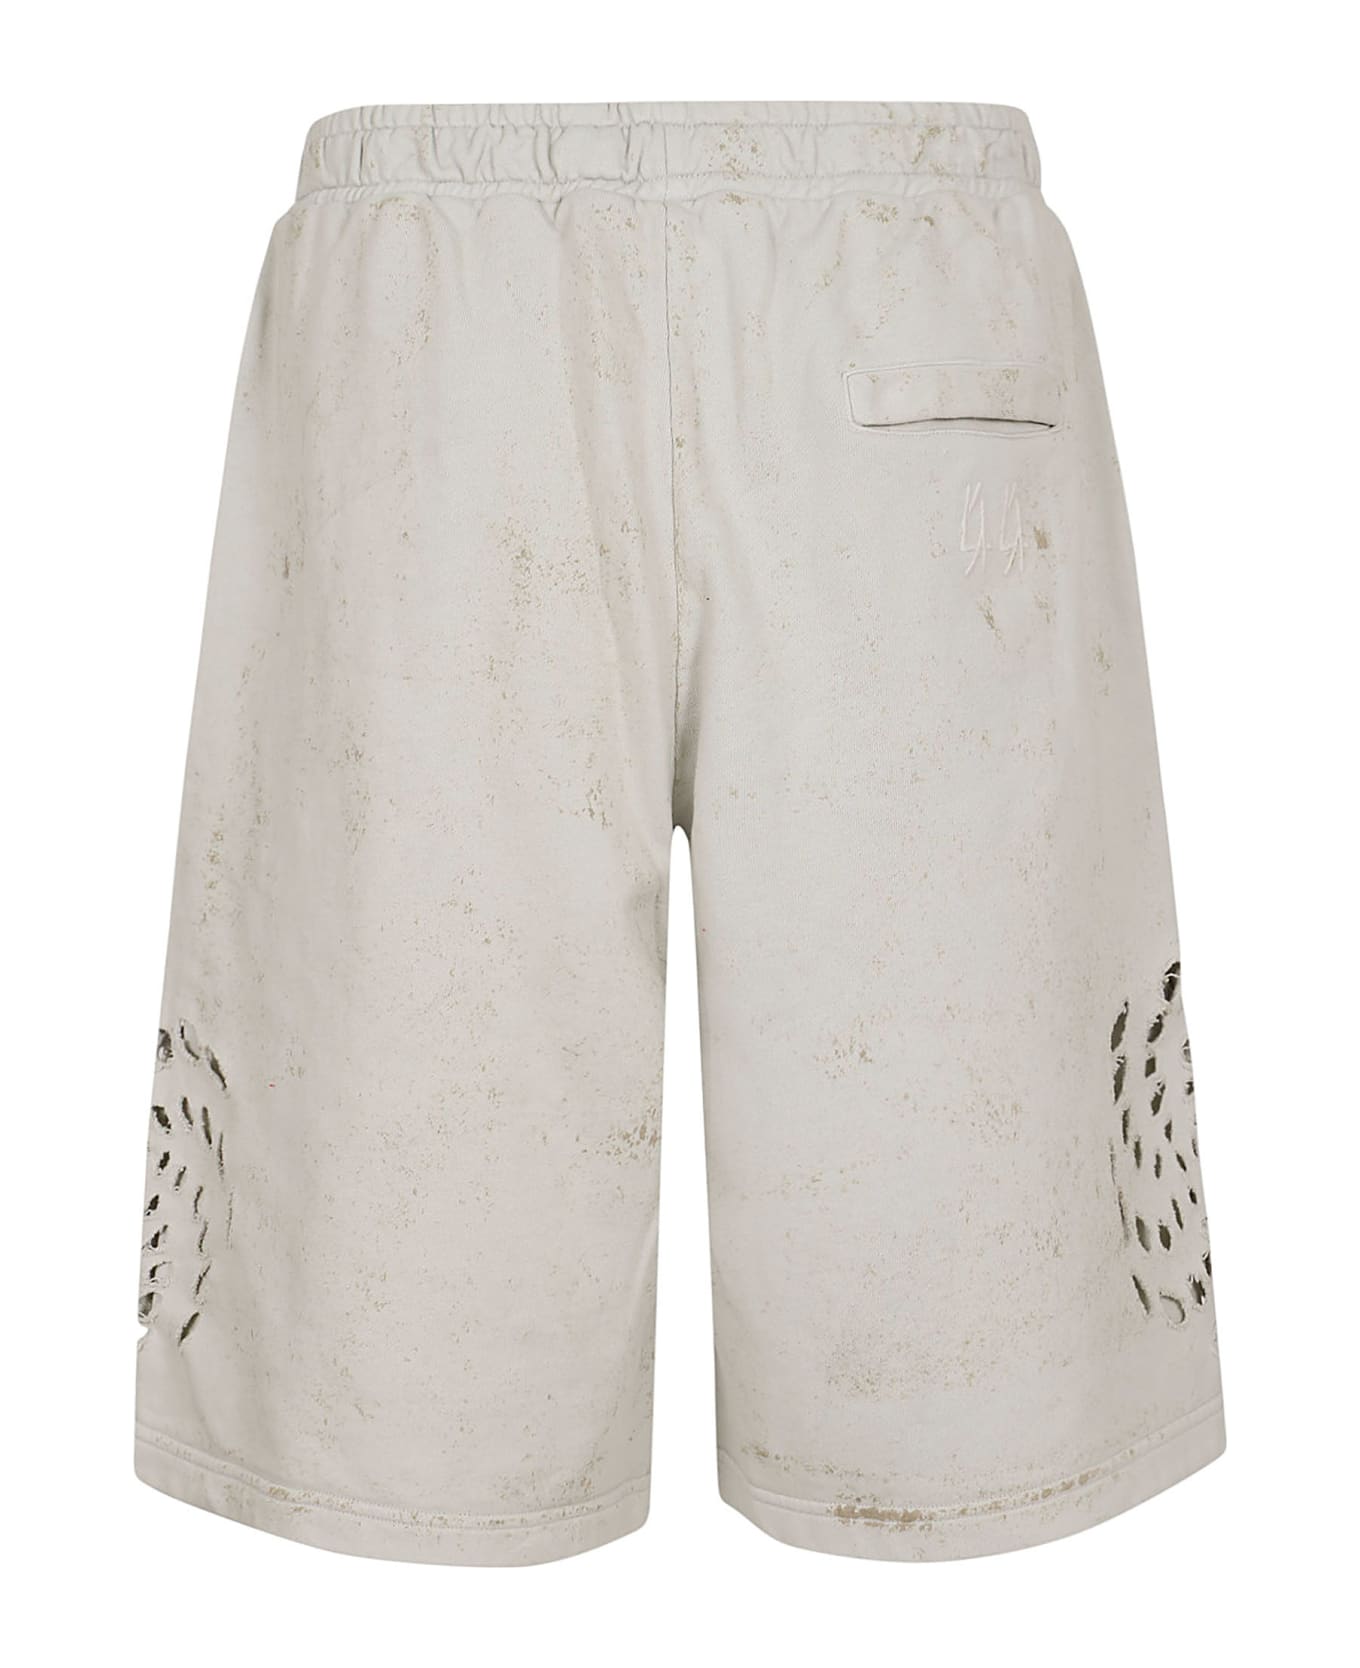 44 Label Group Trip Short Jersey - Dirty White Gyps ショートパンツ